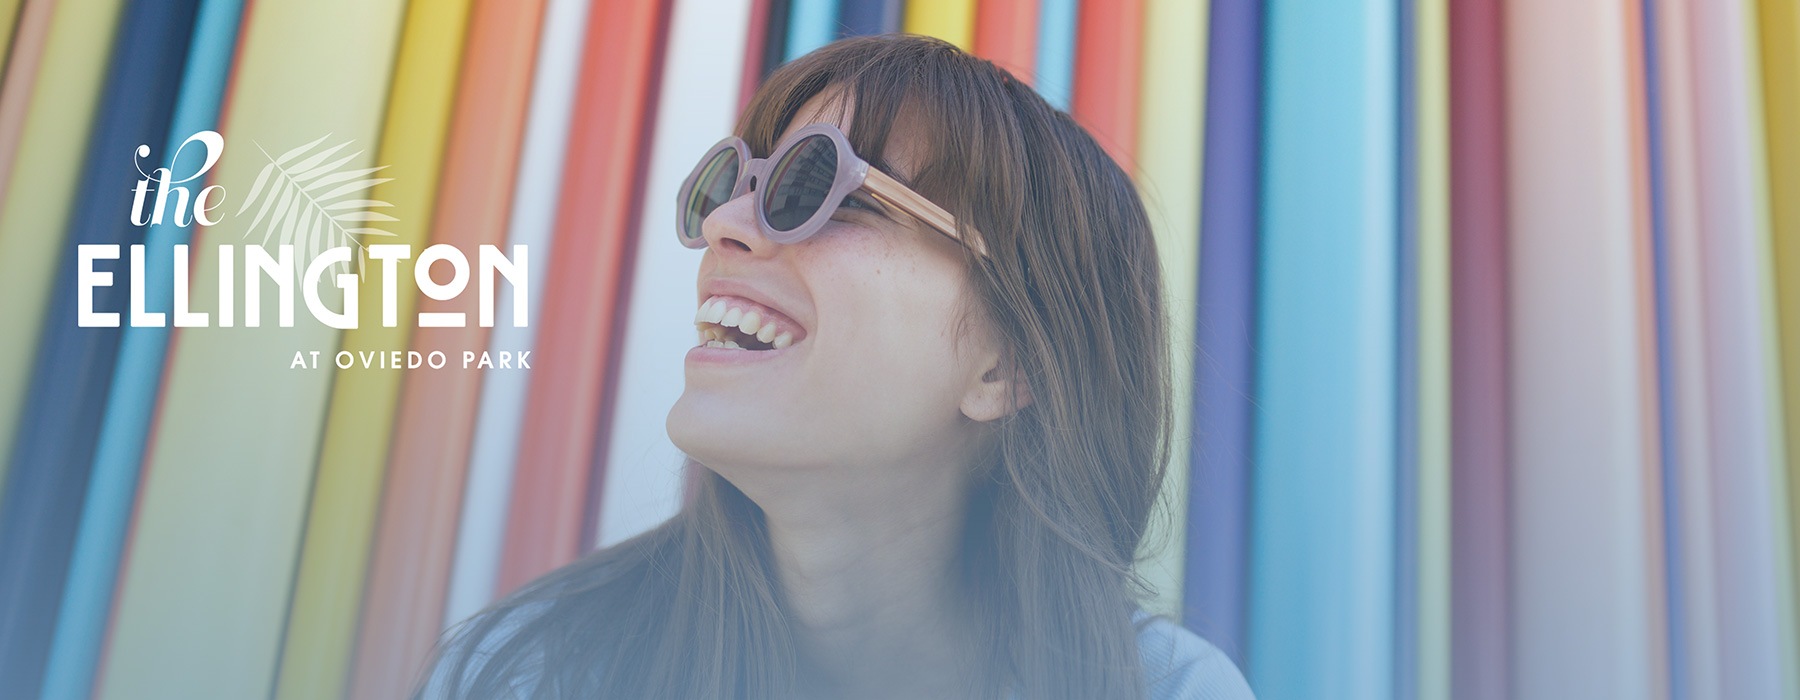 lifestyle image of a young woman smiling in front of a colorful background